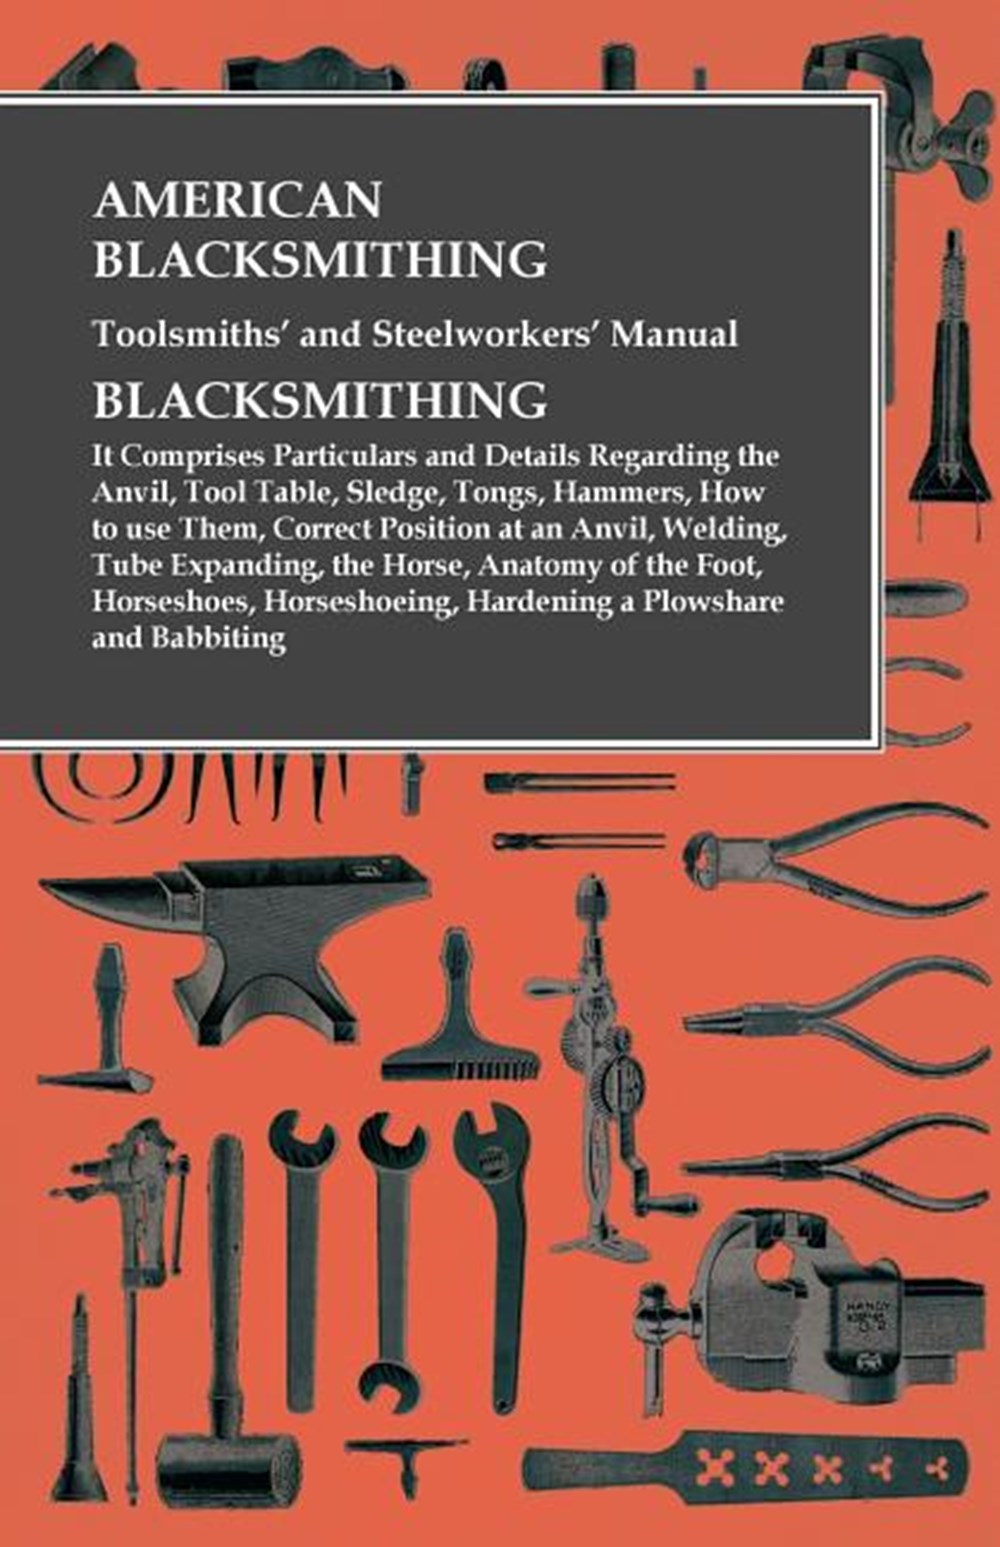 American Blacksmithing, Toolsmiths' and Steelworkers' Manual - It Comprises Particulars and Details 